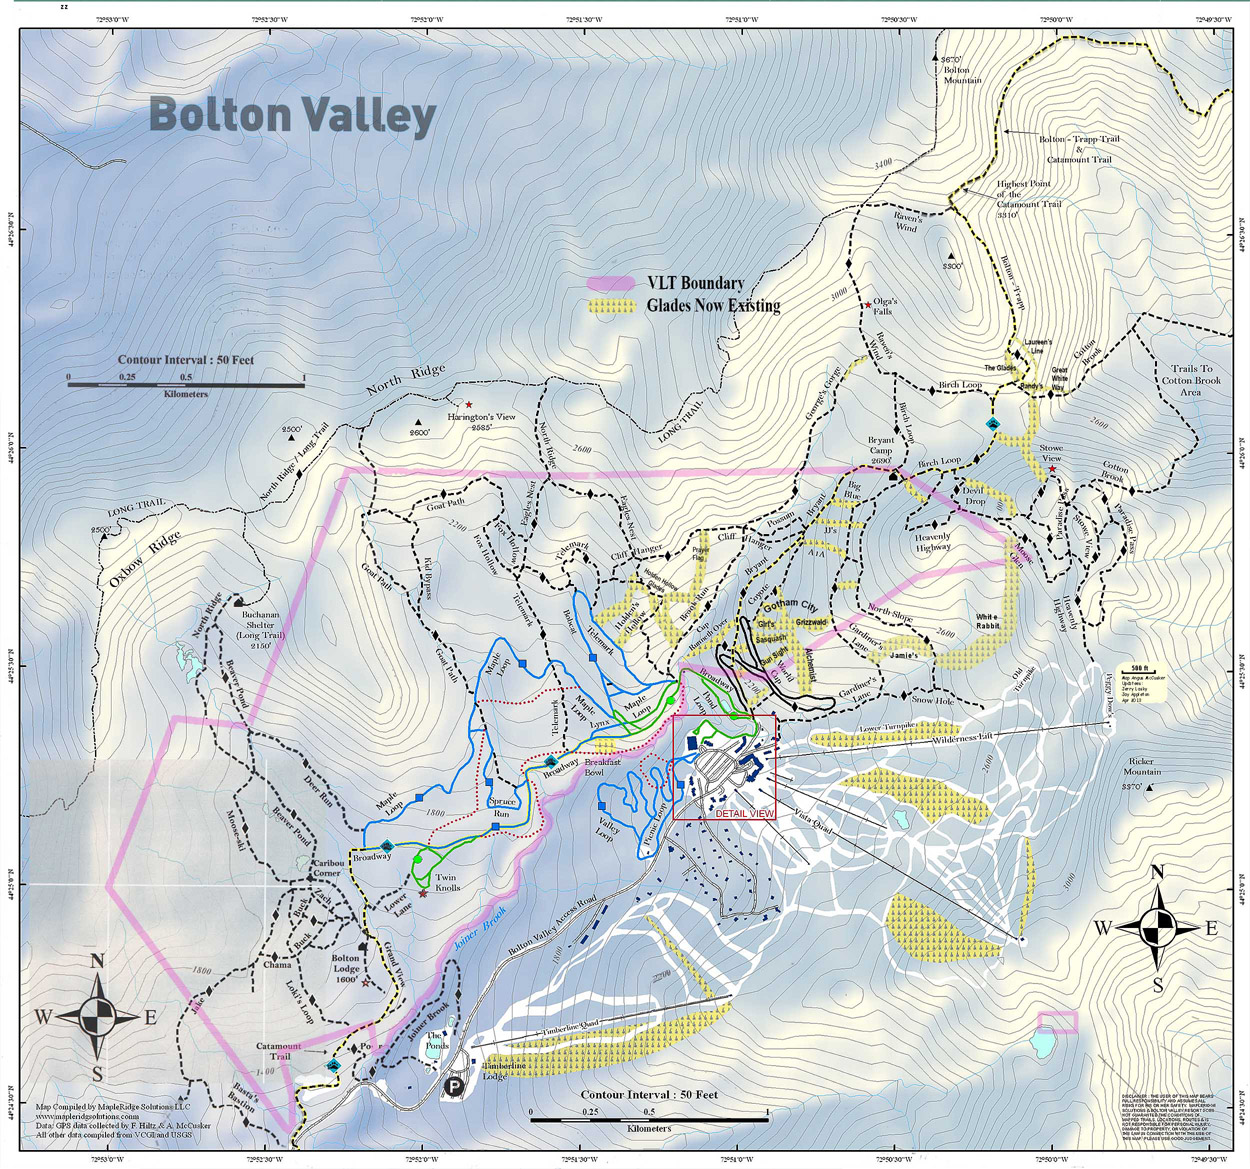 A map of the Nordic and backcountry terrain network at Bolton Valley Ski Resort in Vermont